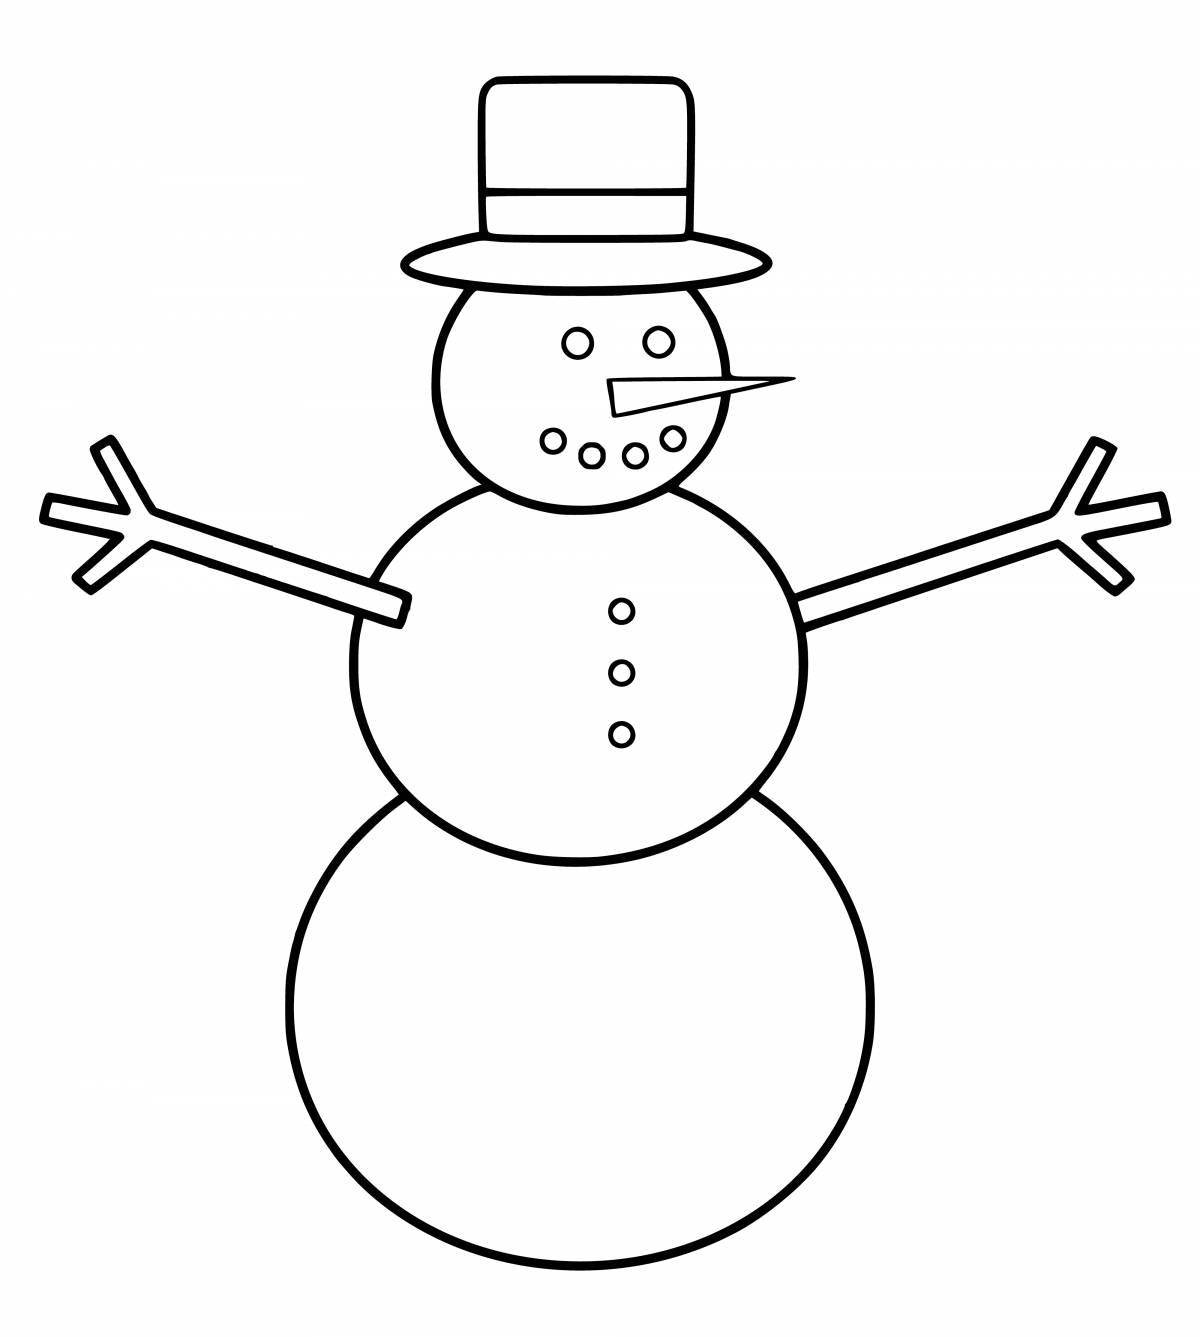 Whimsical snowman coloring for kids